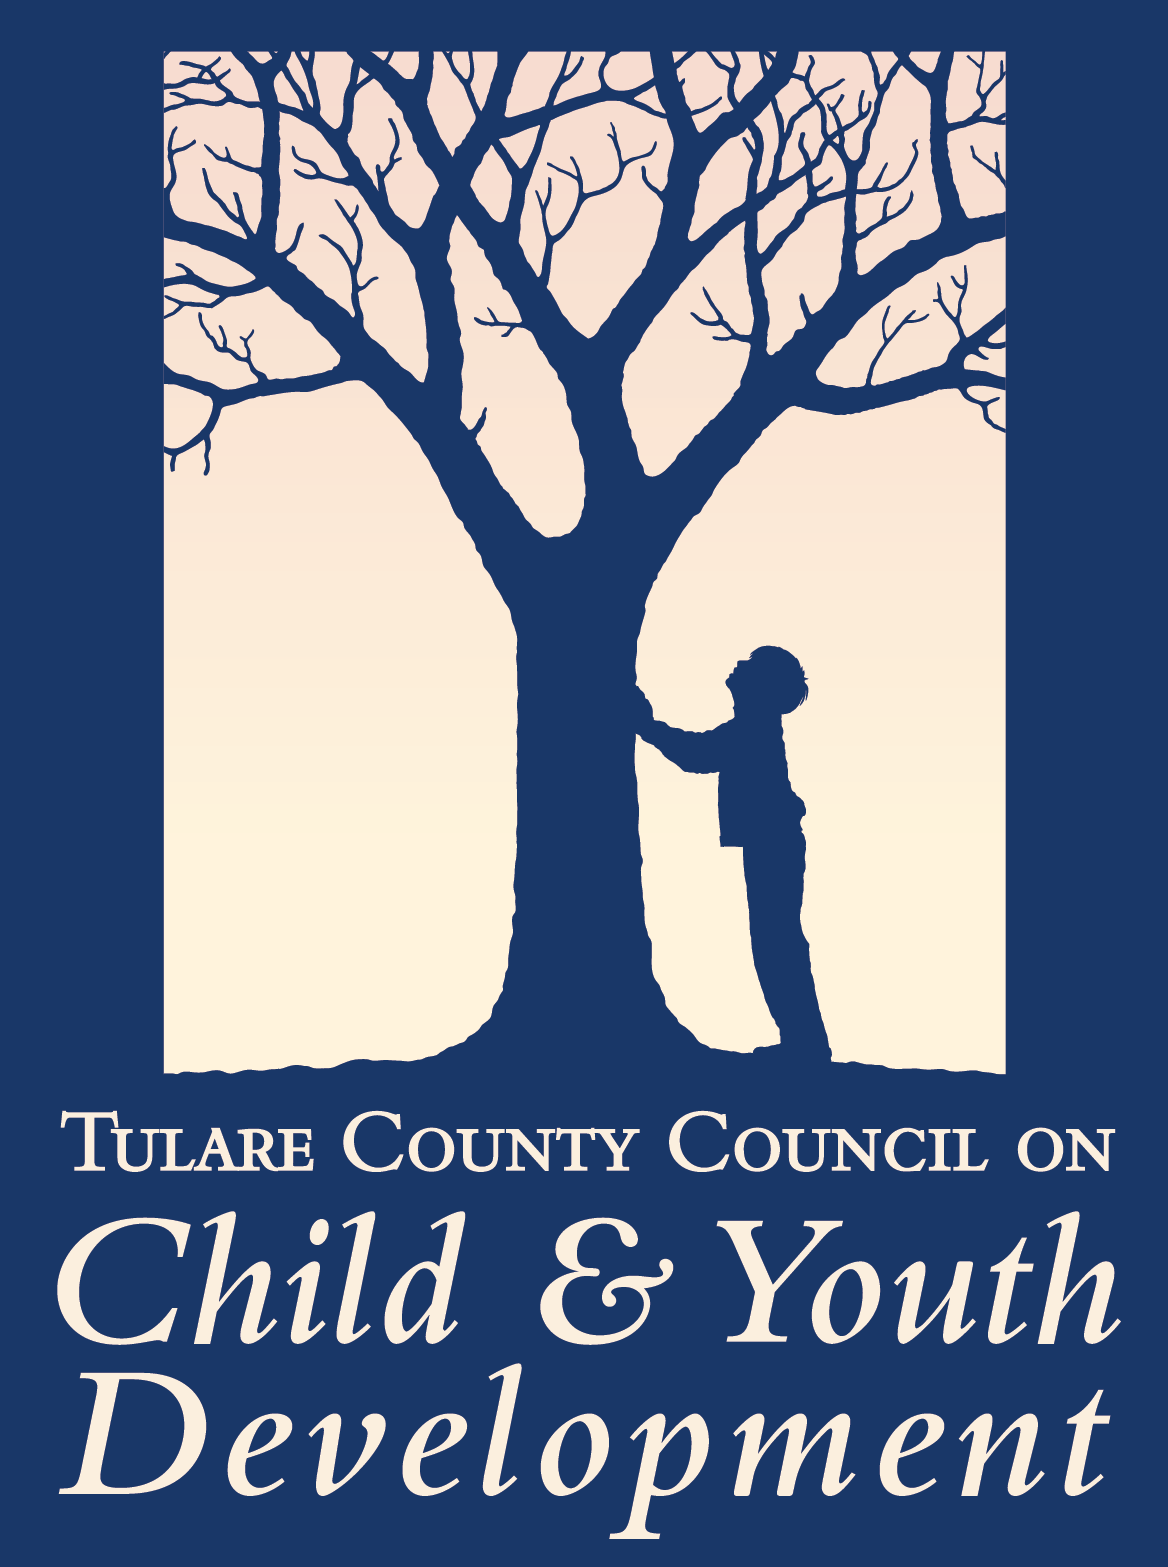 Tulare County Council On Child & Youth Development